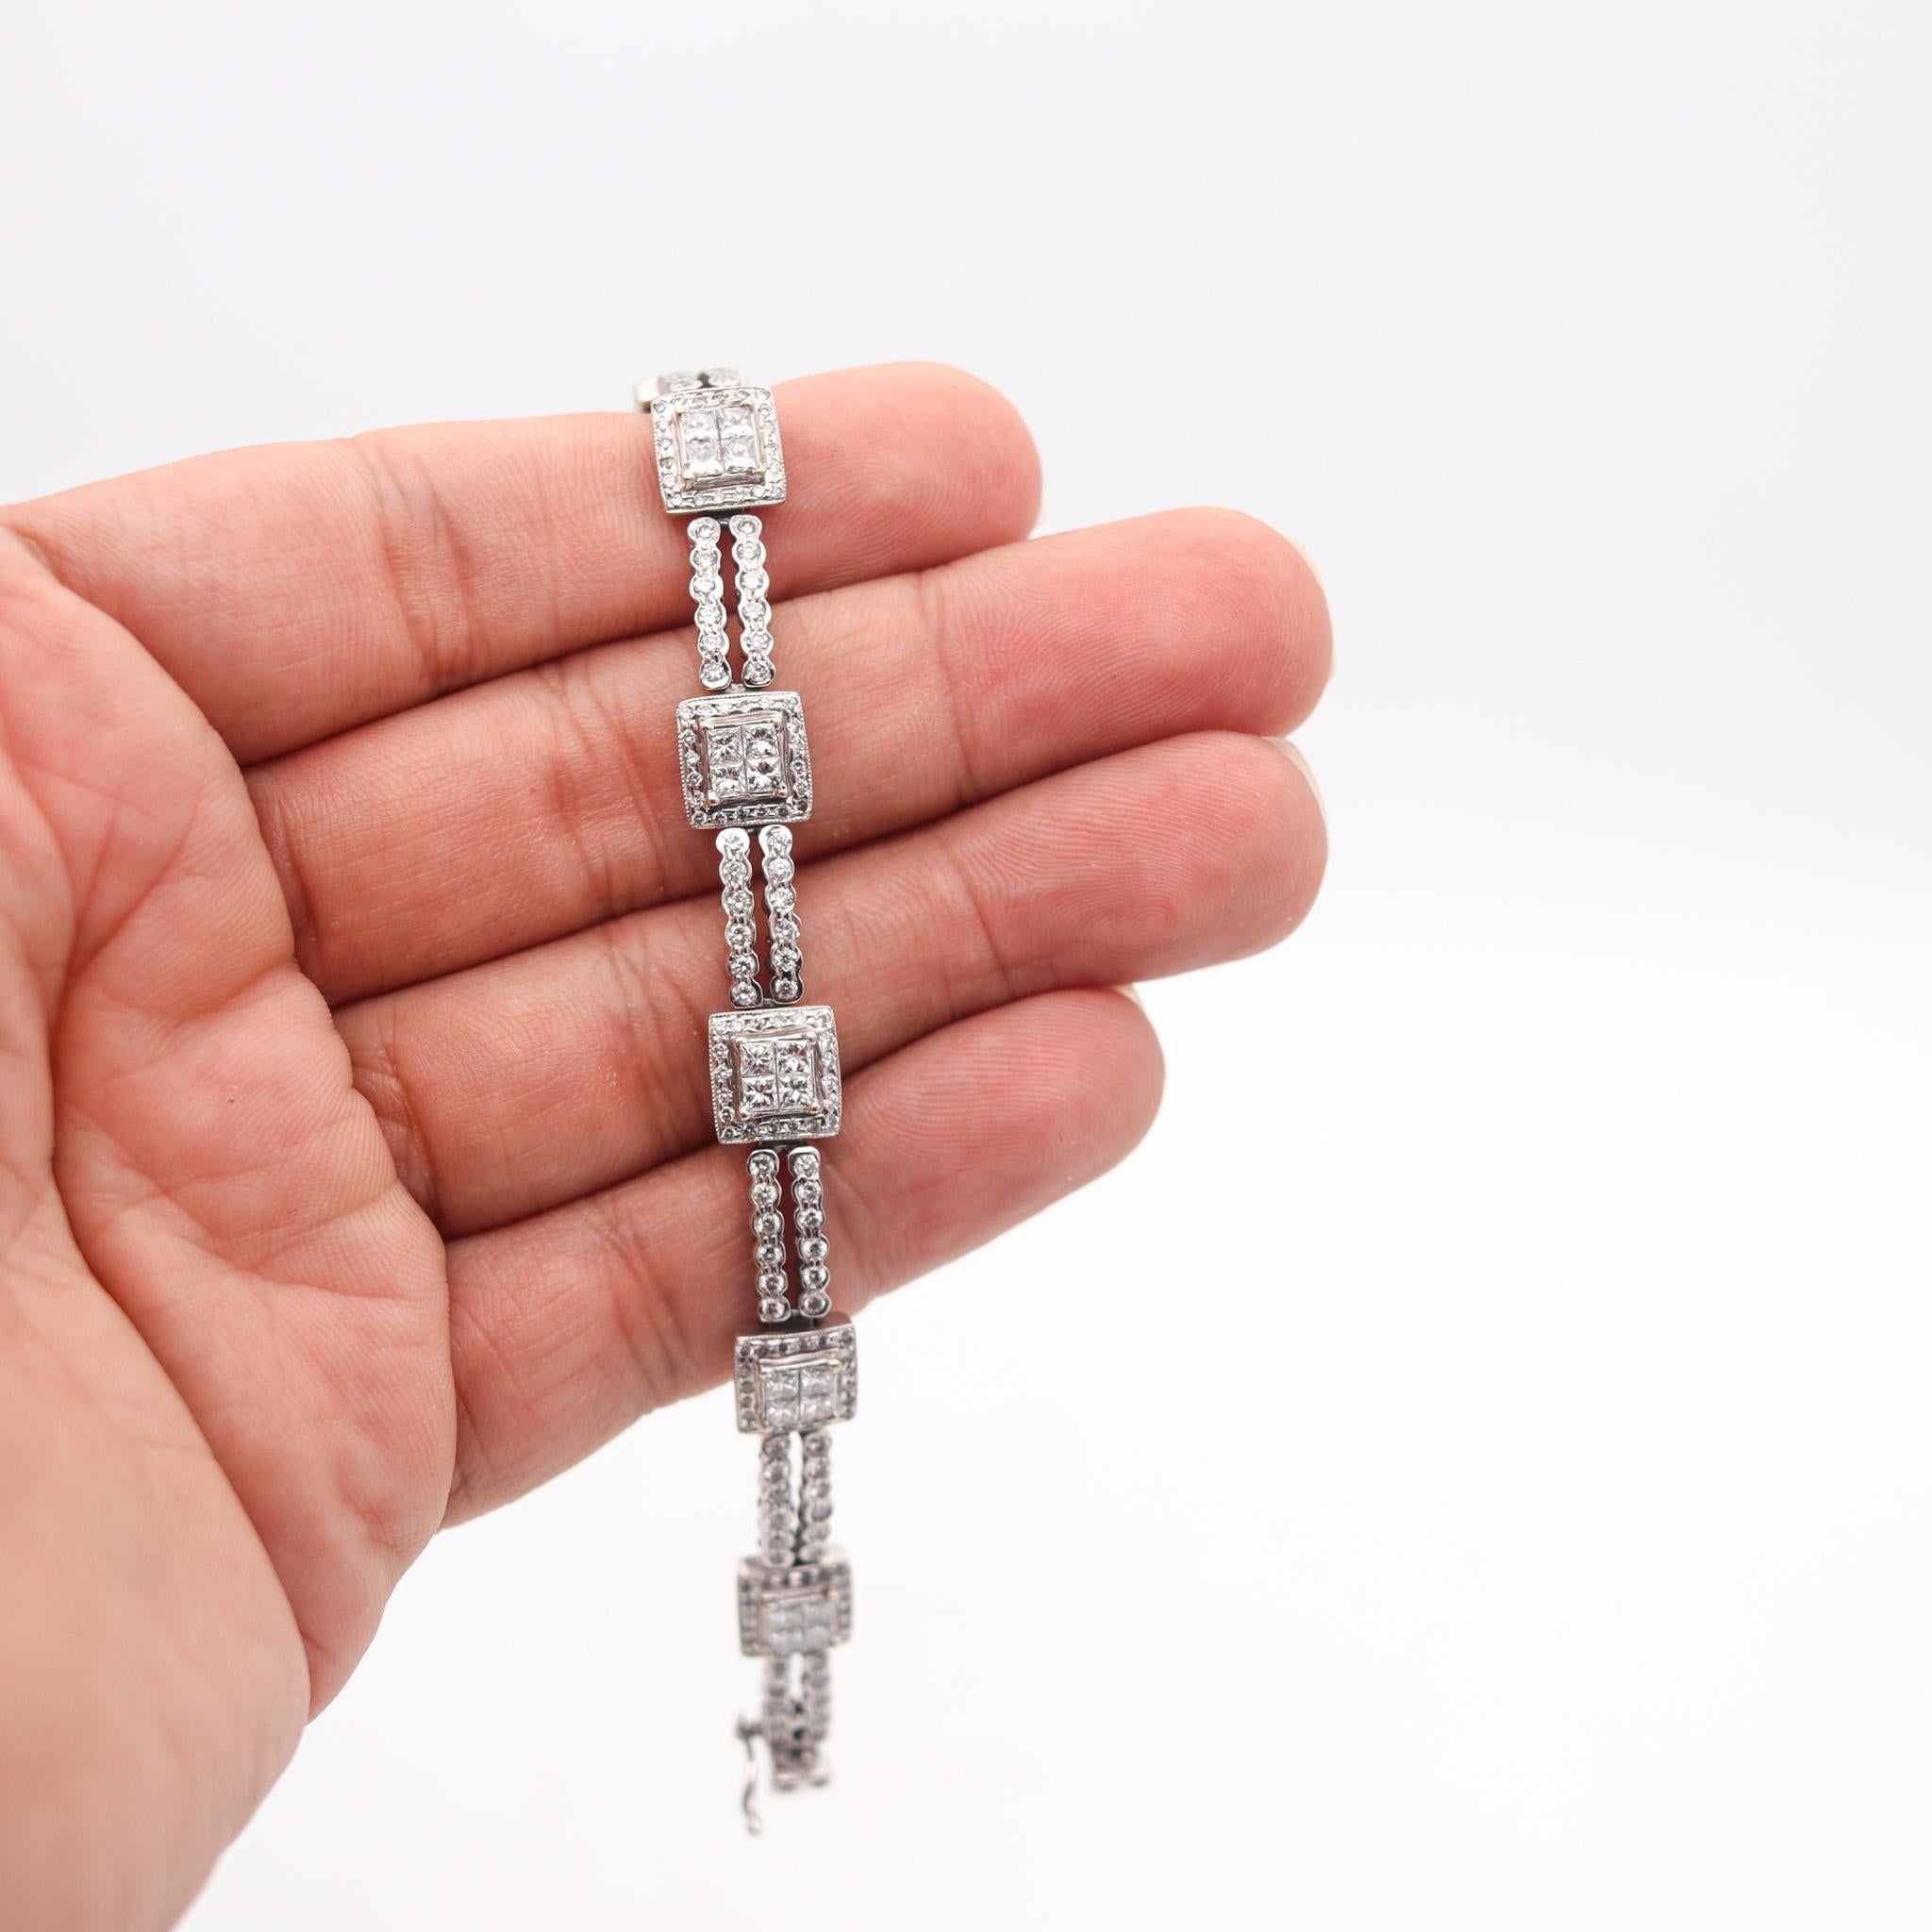 Italian Modernist Station Bracelet In 18Kt White Gold With 7.44 Ctw In Diamonds For Sale 4